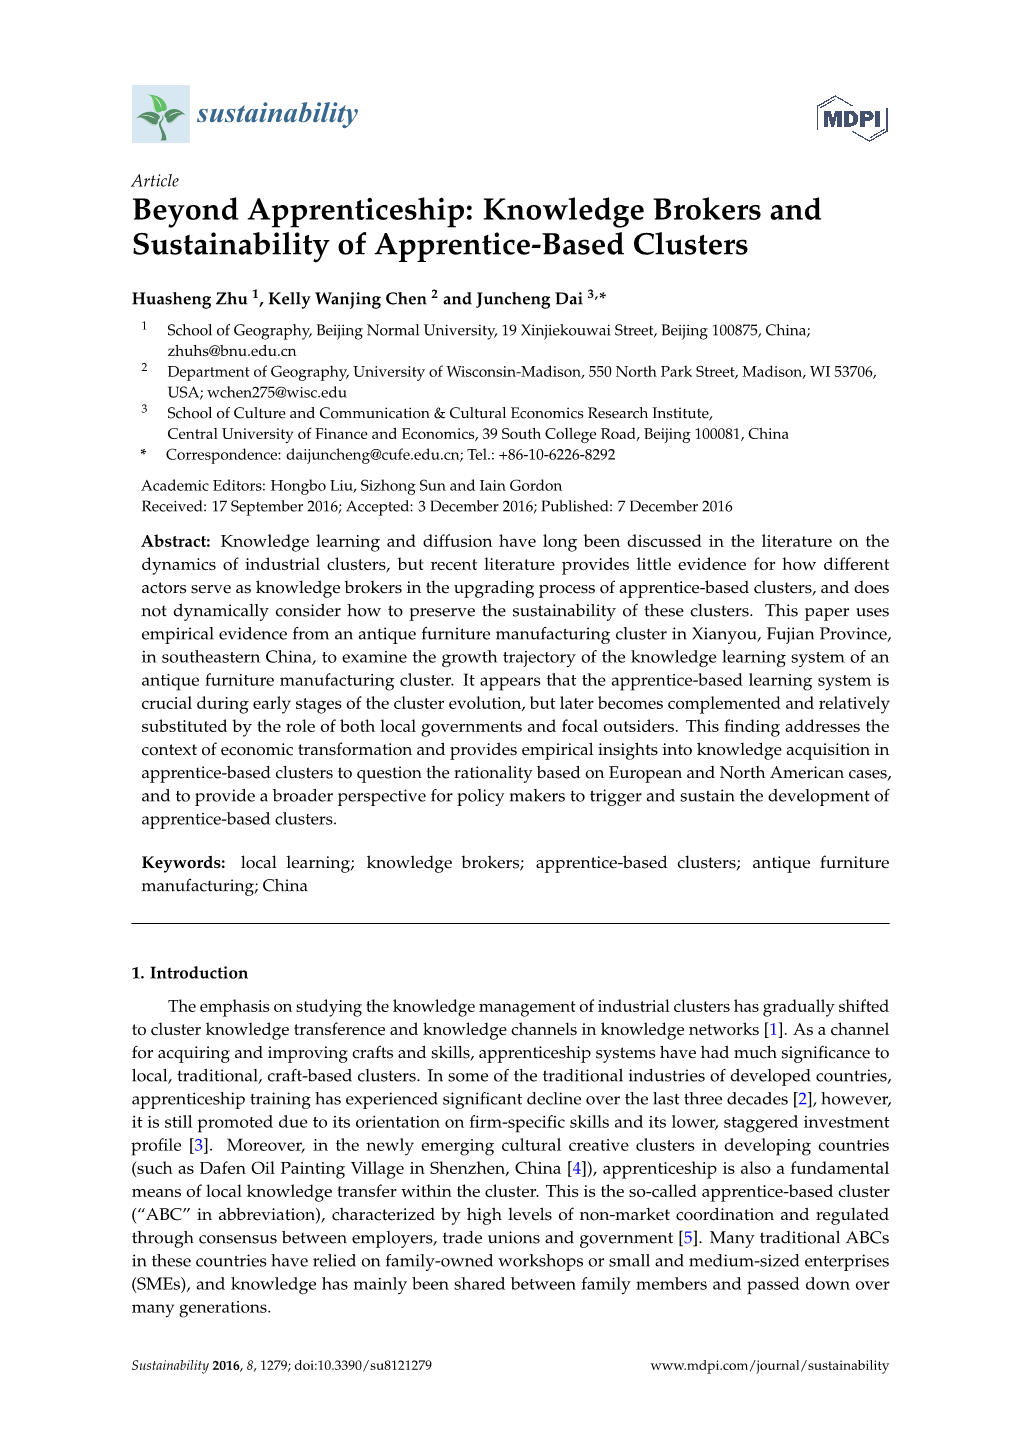 Knowledge Brokers and Sustainability of Apprentice-Based Clusters